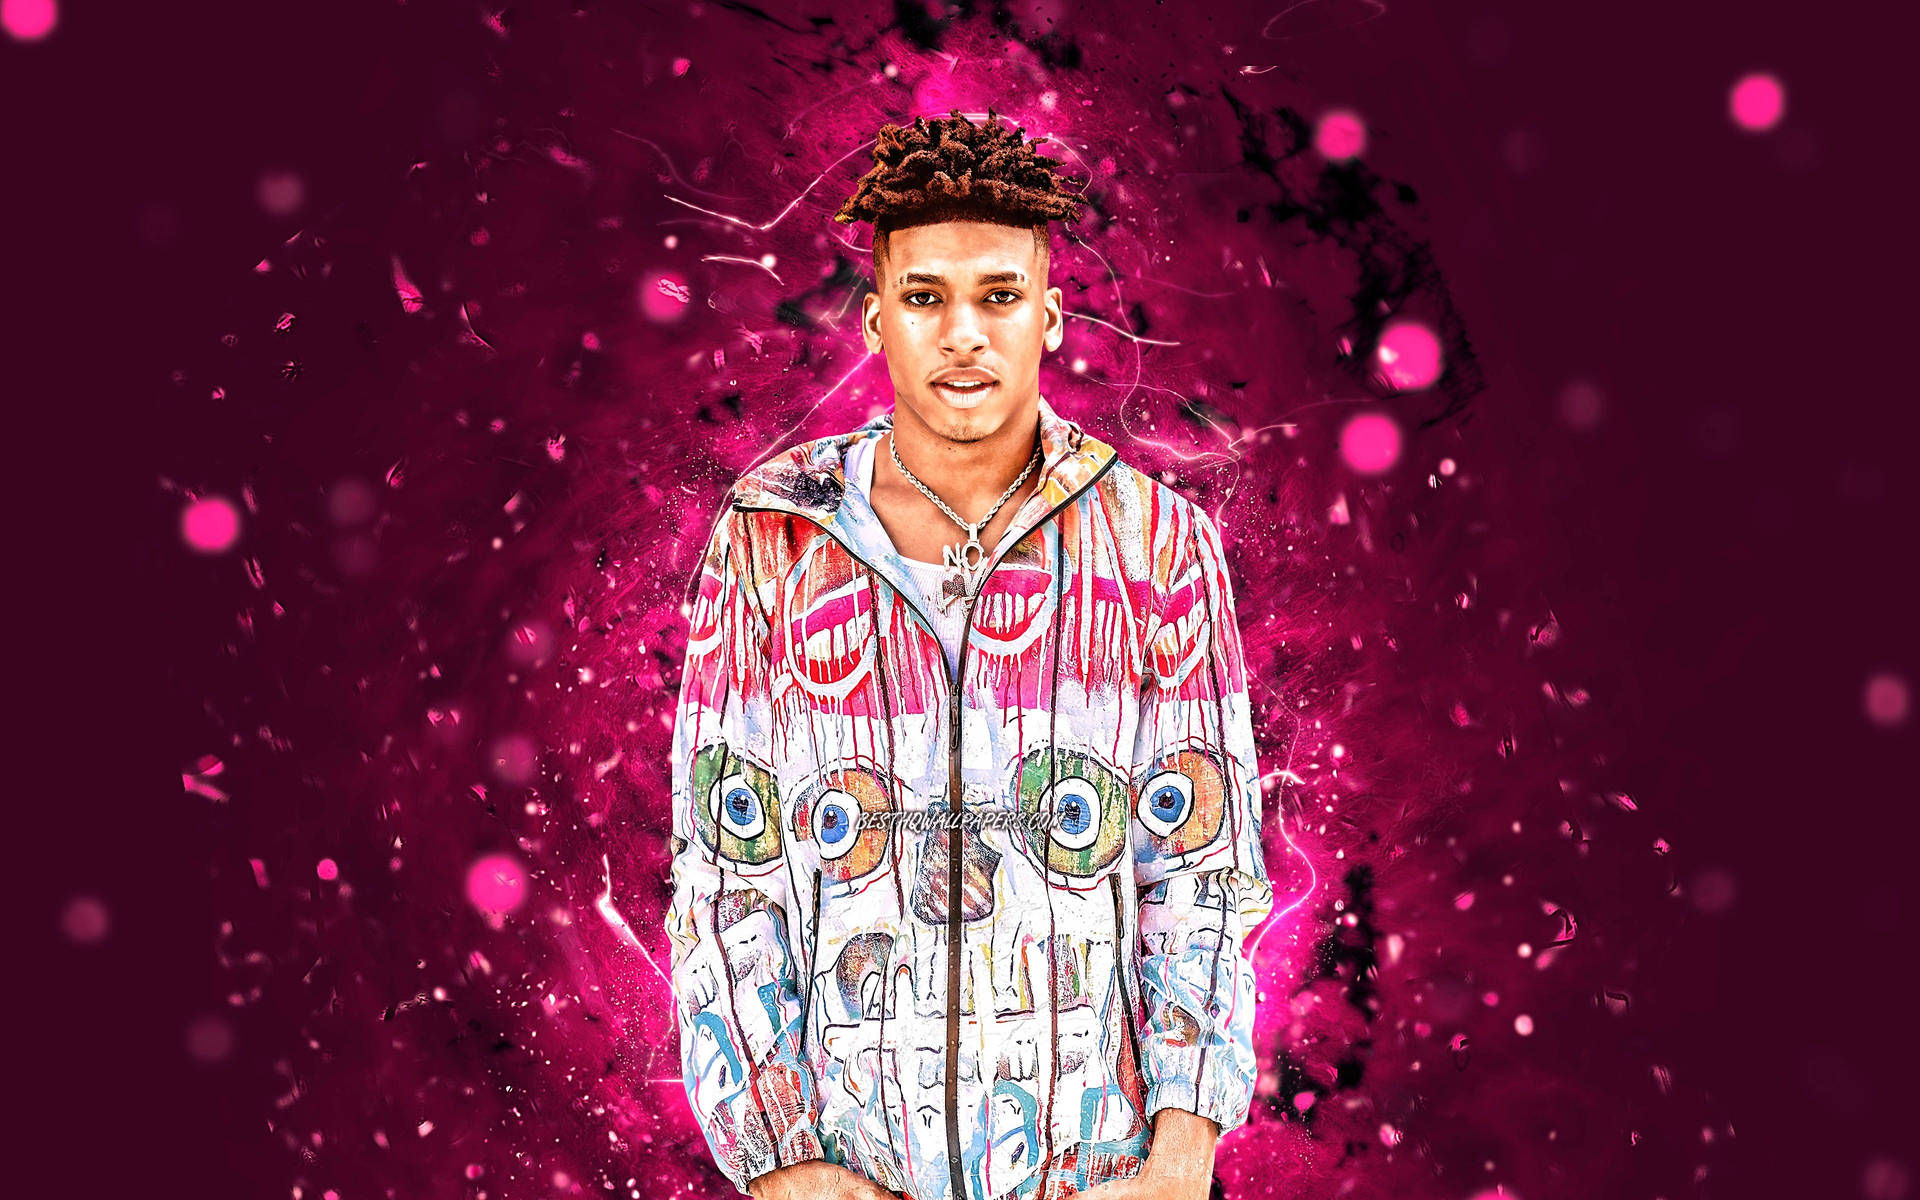 Nle Choppa Bringing Us Something Special With A Pink Aesthetic